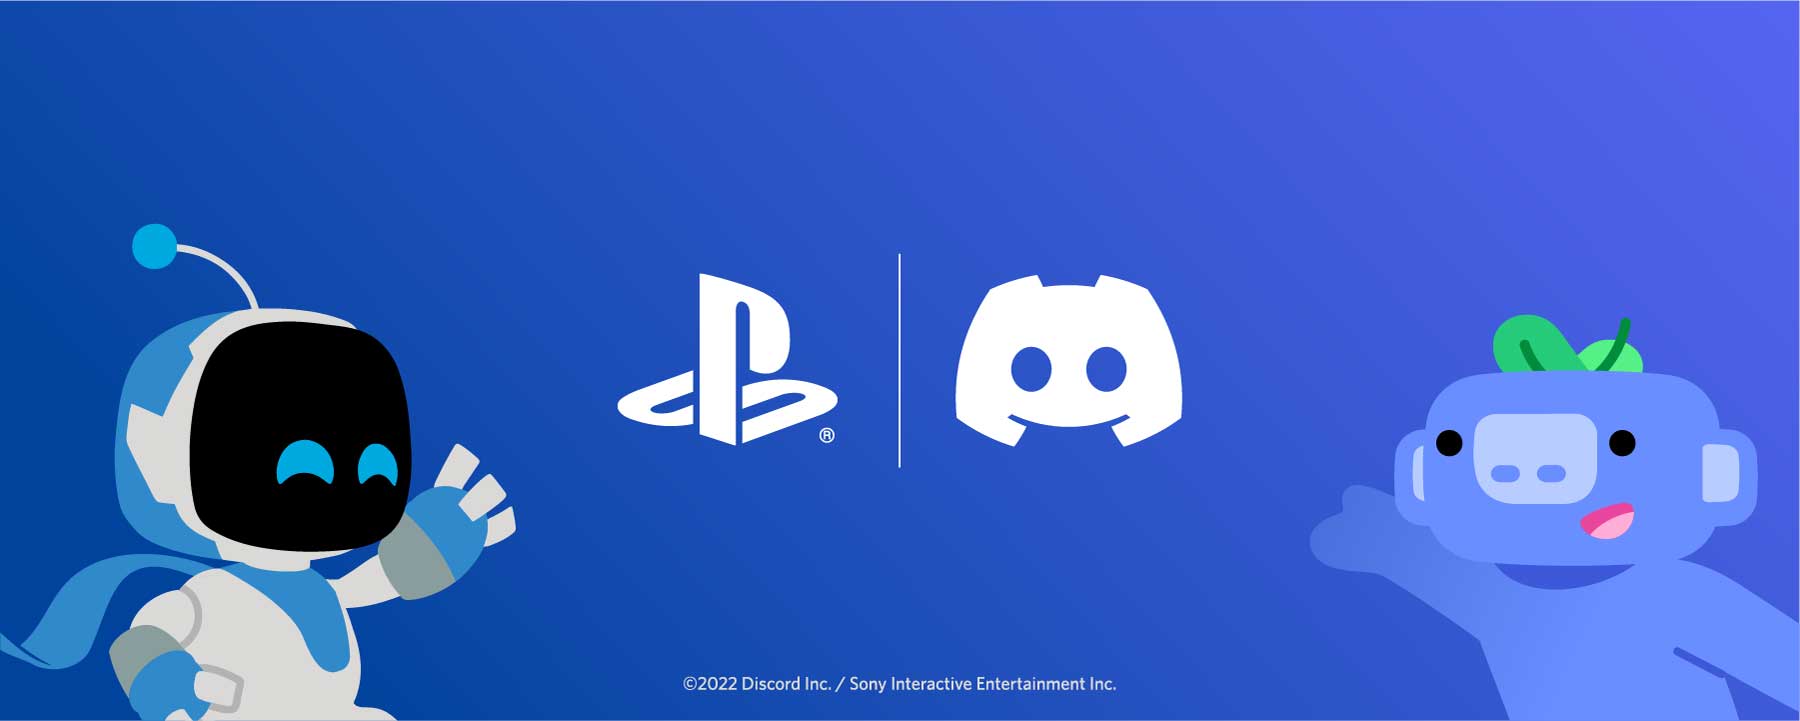 sie playstation discord official  Image of sie playstation discord official